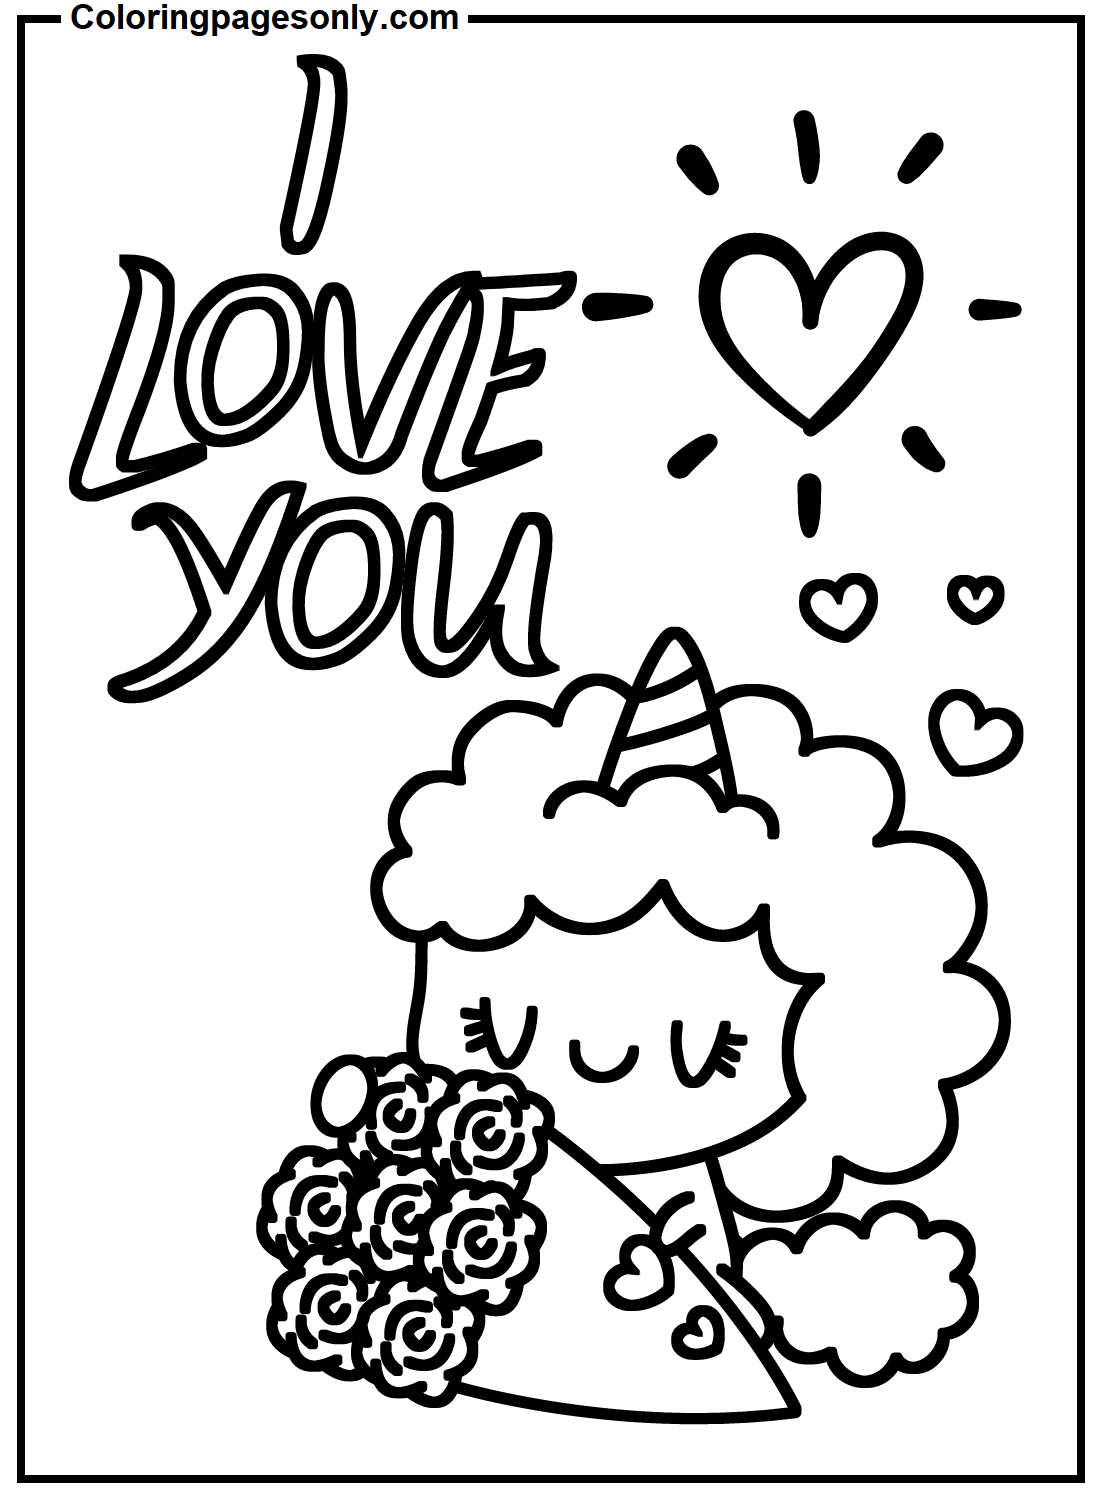 Unicorn Valentine's Day Coloring Pages